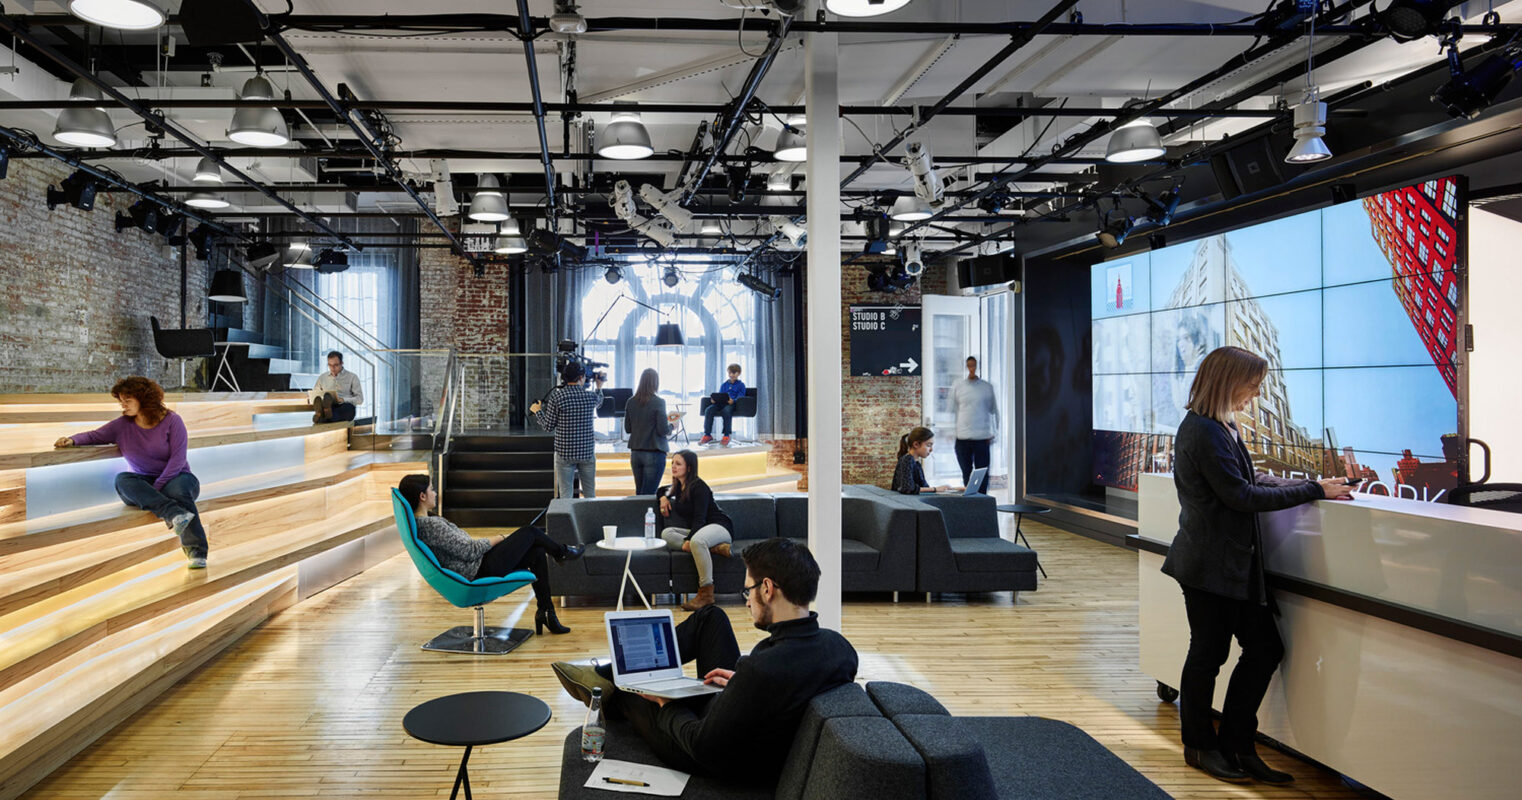 Open-plan office space featuring tiered seating steps, exposed ceiling beams, industrial-style lighting, and a mix of casual workstations with a central interactive digital display. Warm wood tones contrast against a backdrop of brick walls, enhancing the space's modern yet rustic charm.